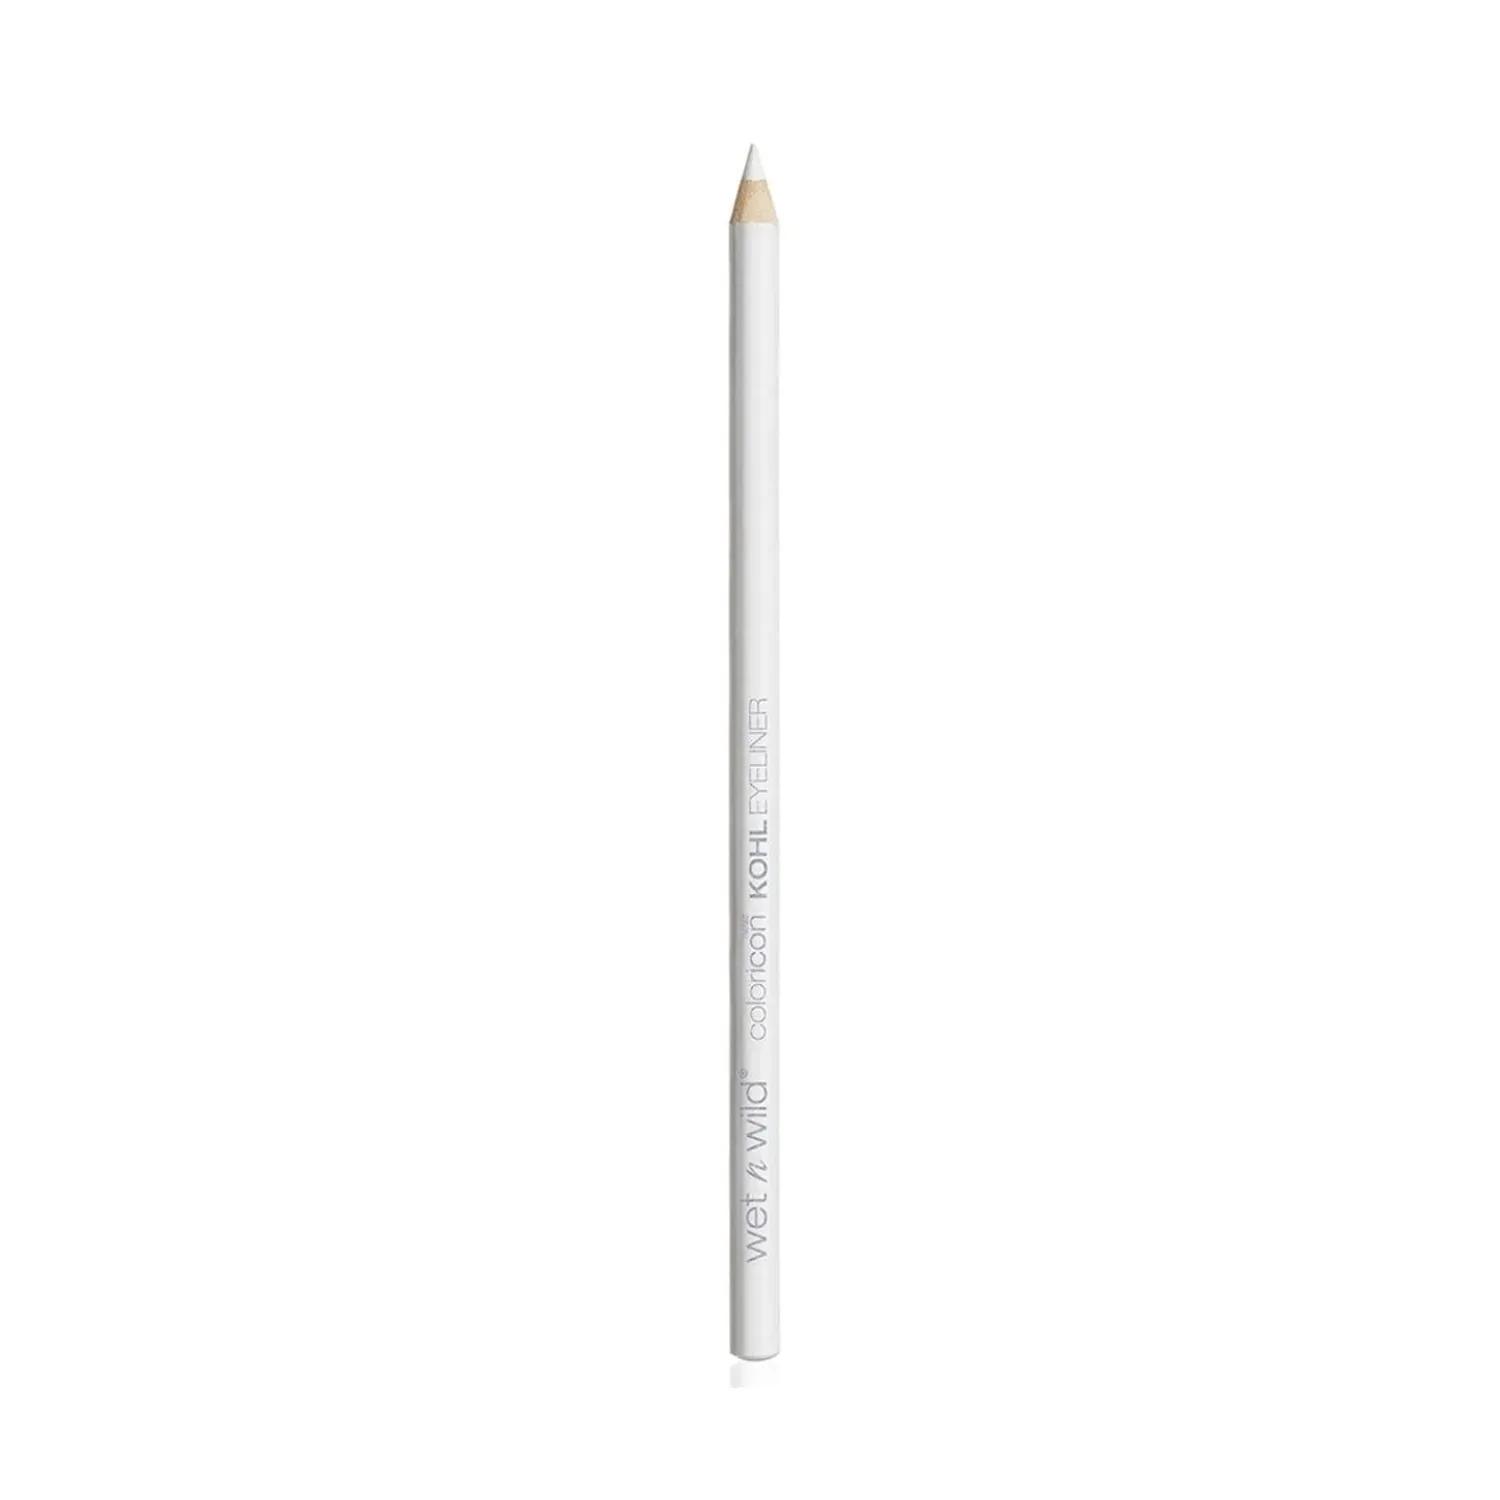 wet n wild color icon kohl liner pencil - you're always white (1.4g)